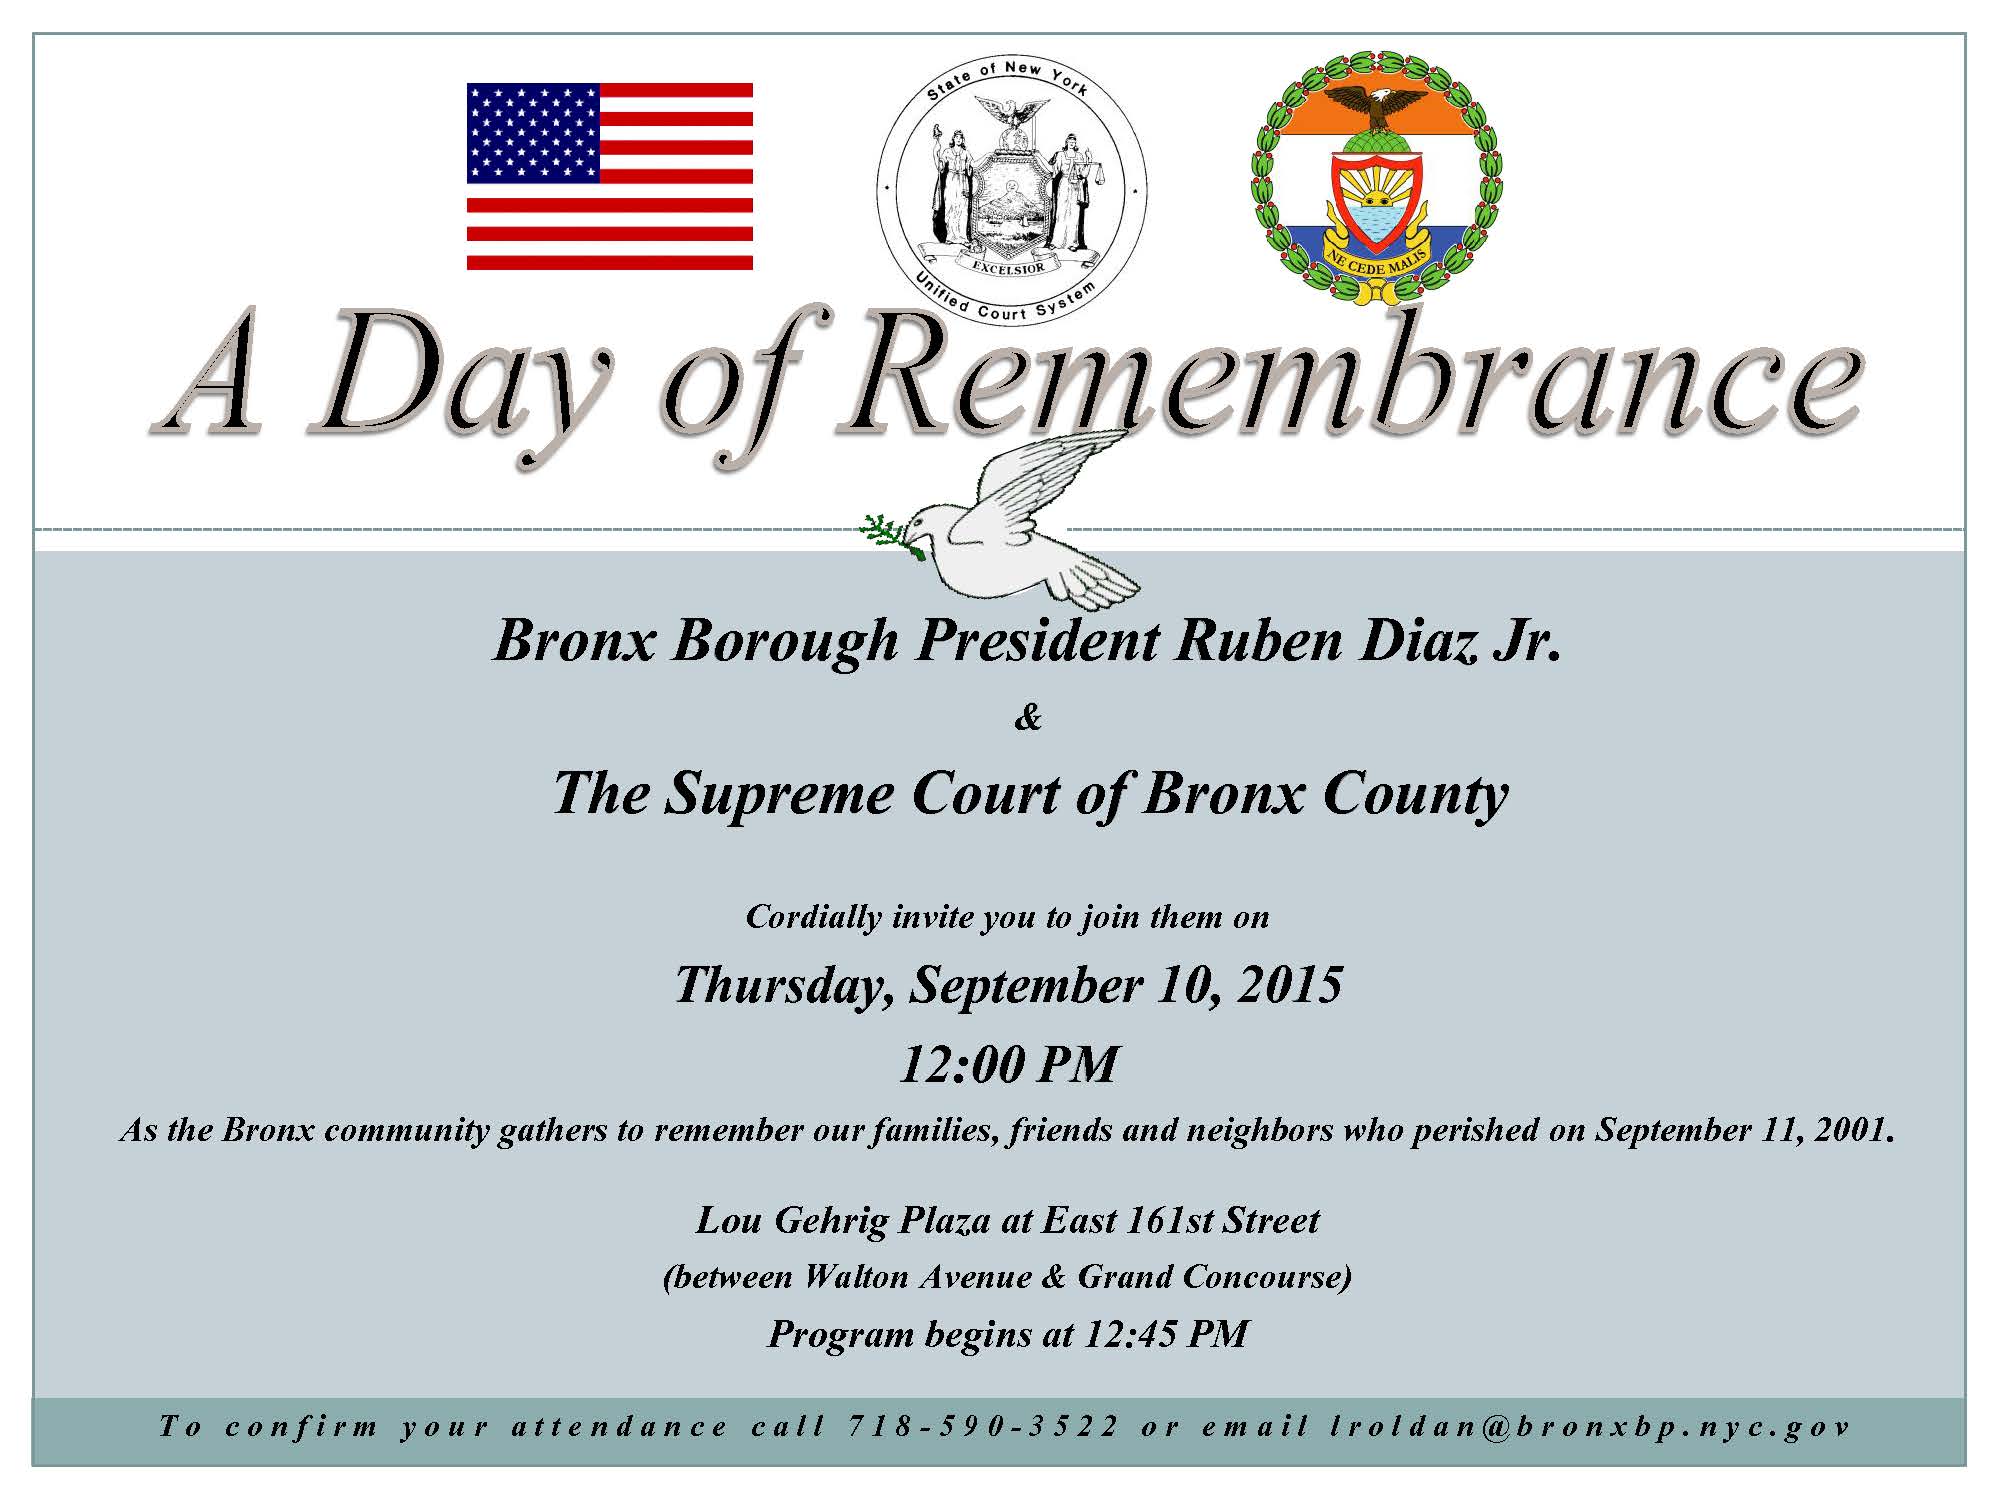 PRESS APPROVED FLIER A Day of Remembrance